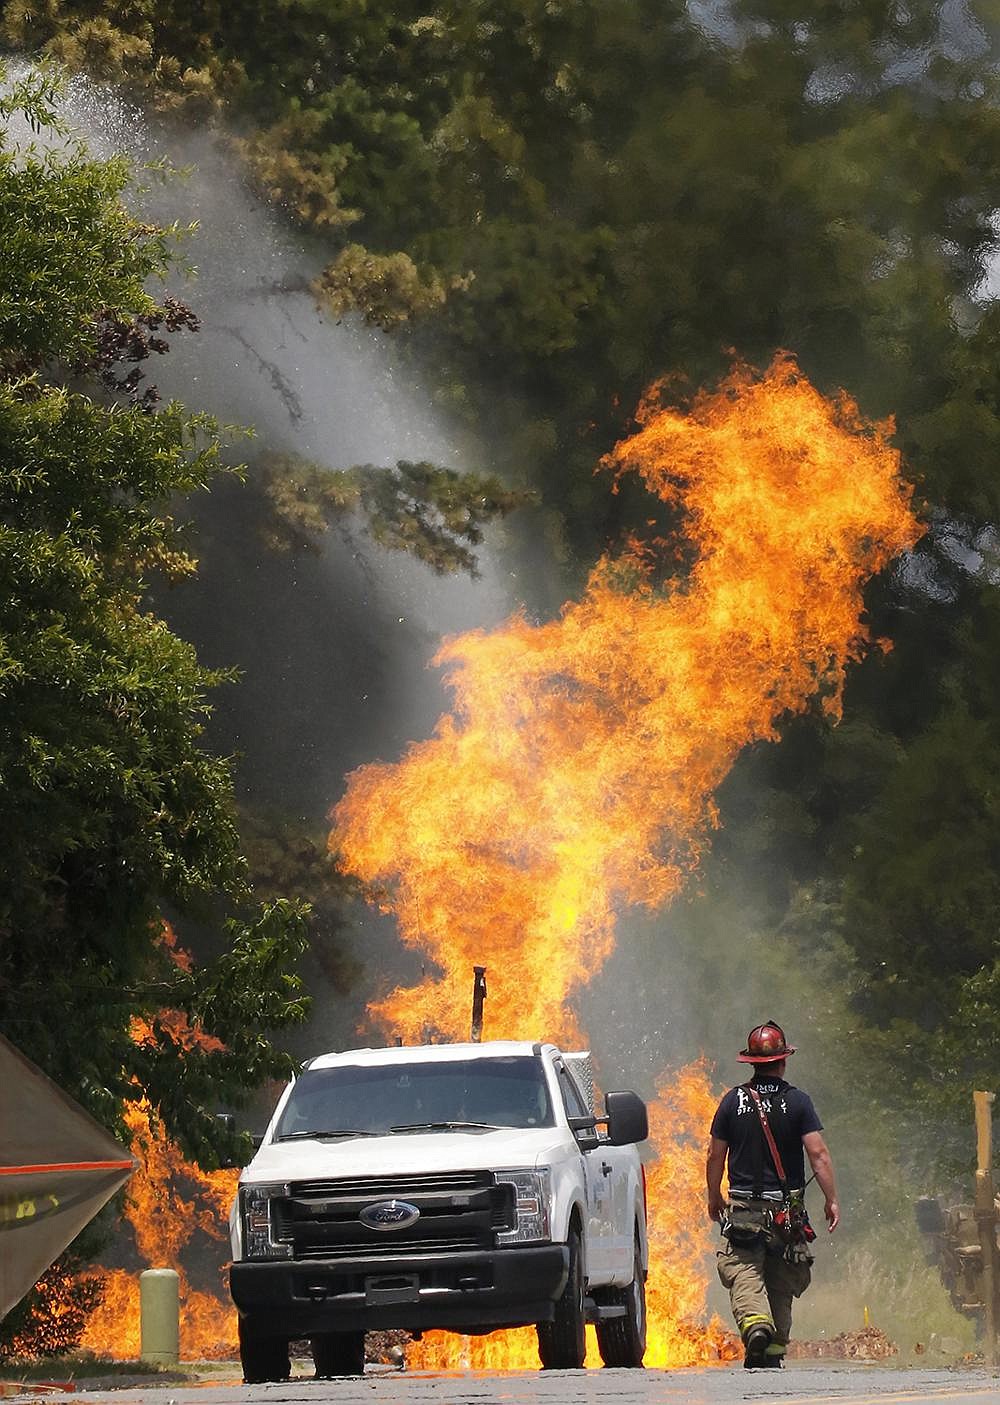 Firefighters approach a gas main fire that erupted Thursday afternoon in Maumelle. Two men were reportedly injured in the initial explosion, which occurred near the intersection of Edgewood Drive and Windwood Lane, across the street from the Jess Odom Community Center. More photos at arkansasonline.com/619gasfire/.
(Arkansas Democrat-Gazette/John Sykes Jr.)